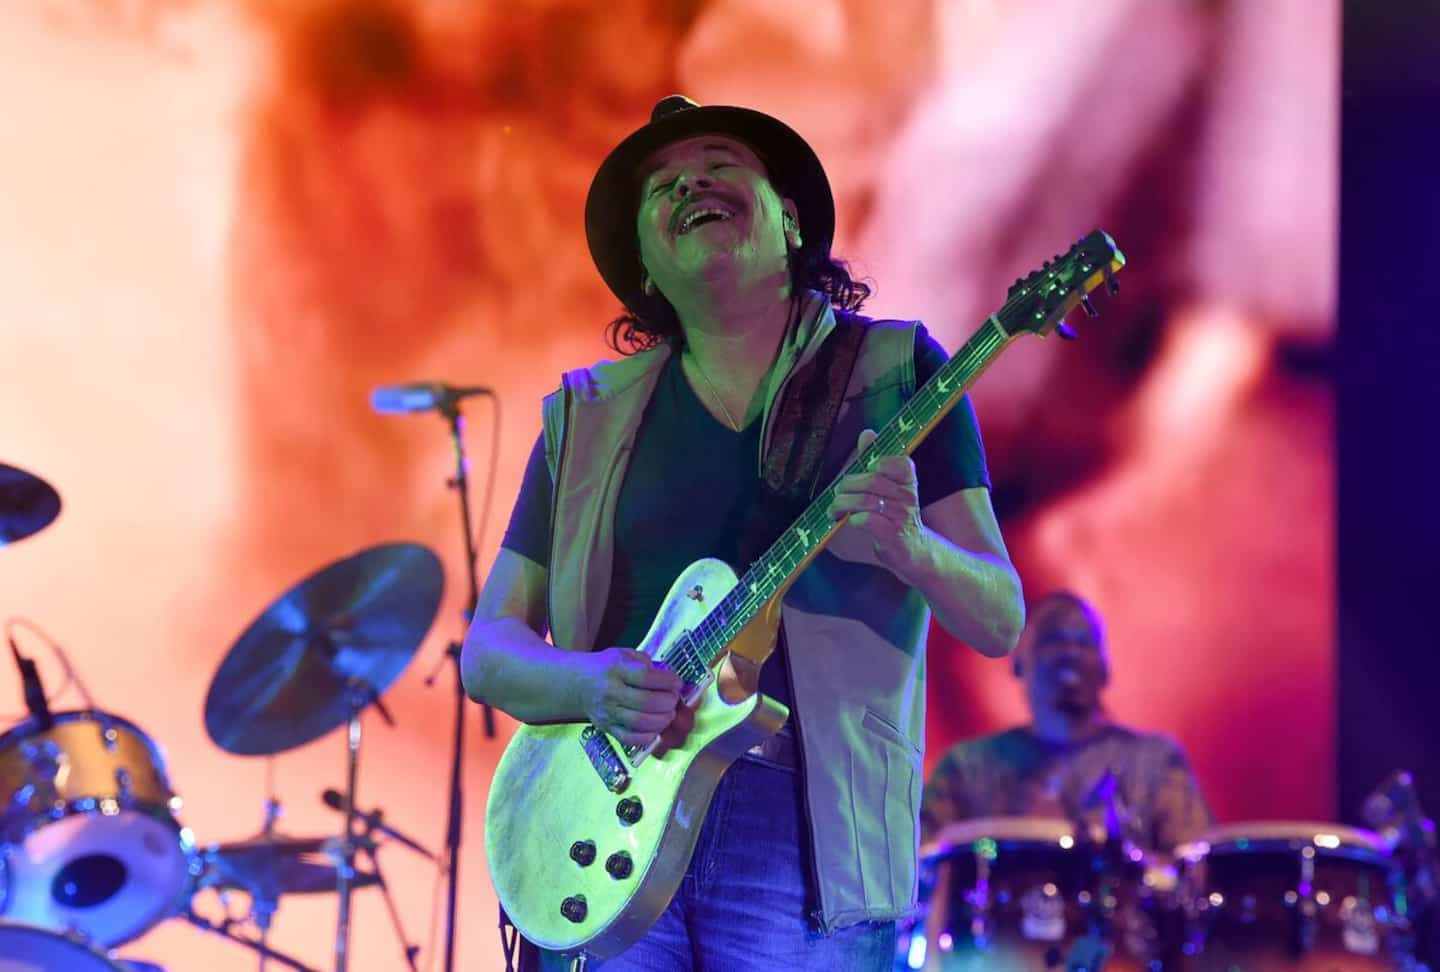 Guitarist Santana "forgets" to eat and drink and becomes unwell in the middle of a concert